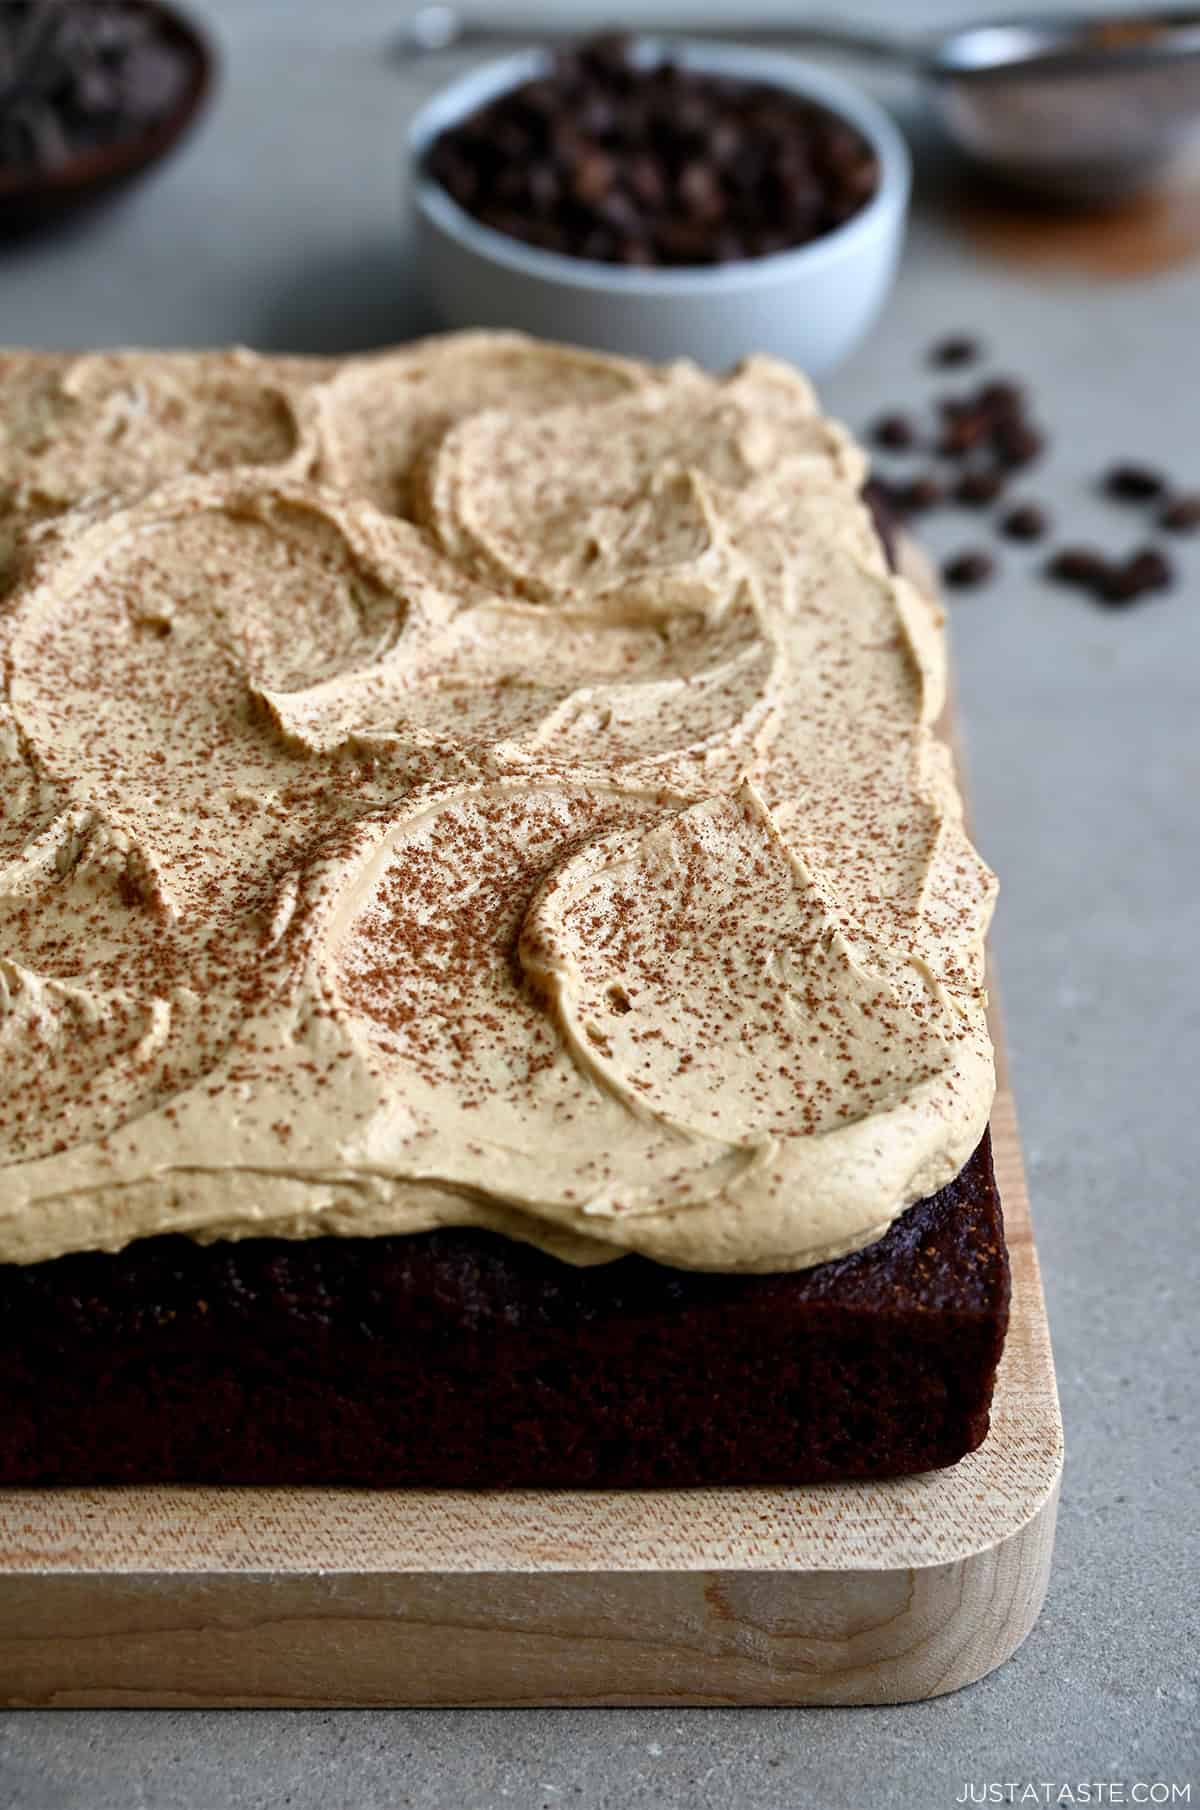 A thick layer of coffee buttercream frosting dusted with cocoa powder atop a chocolate sheet cake.